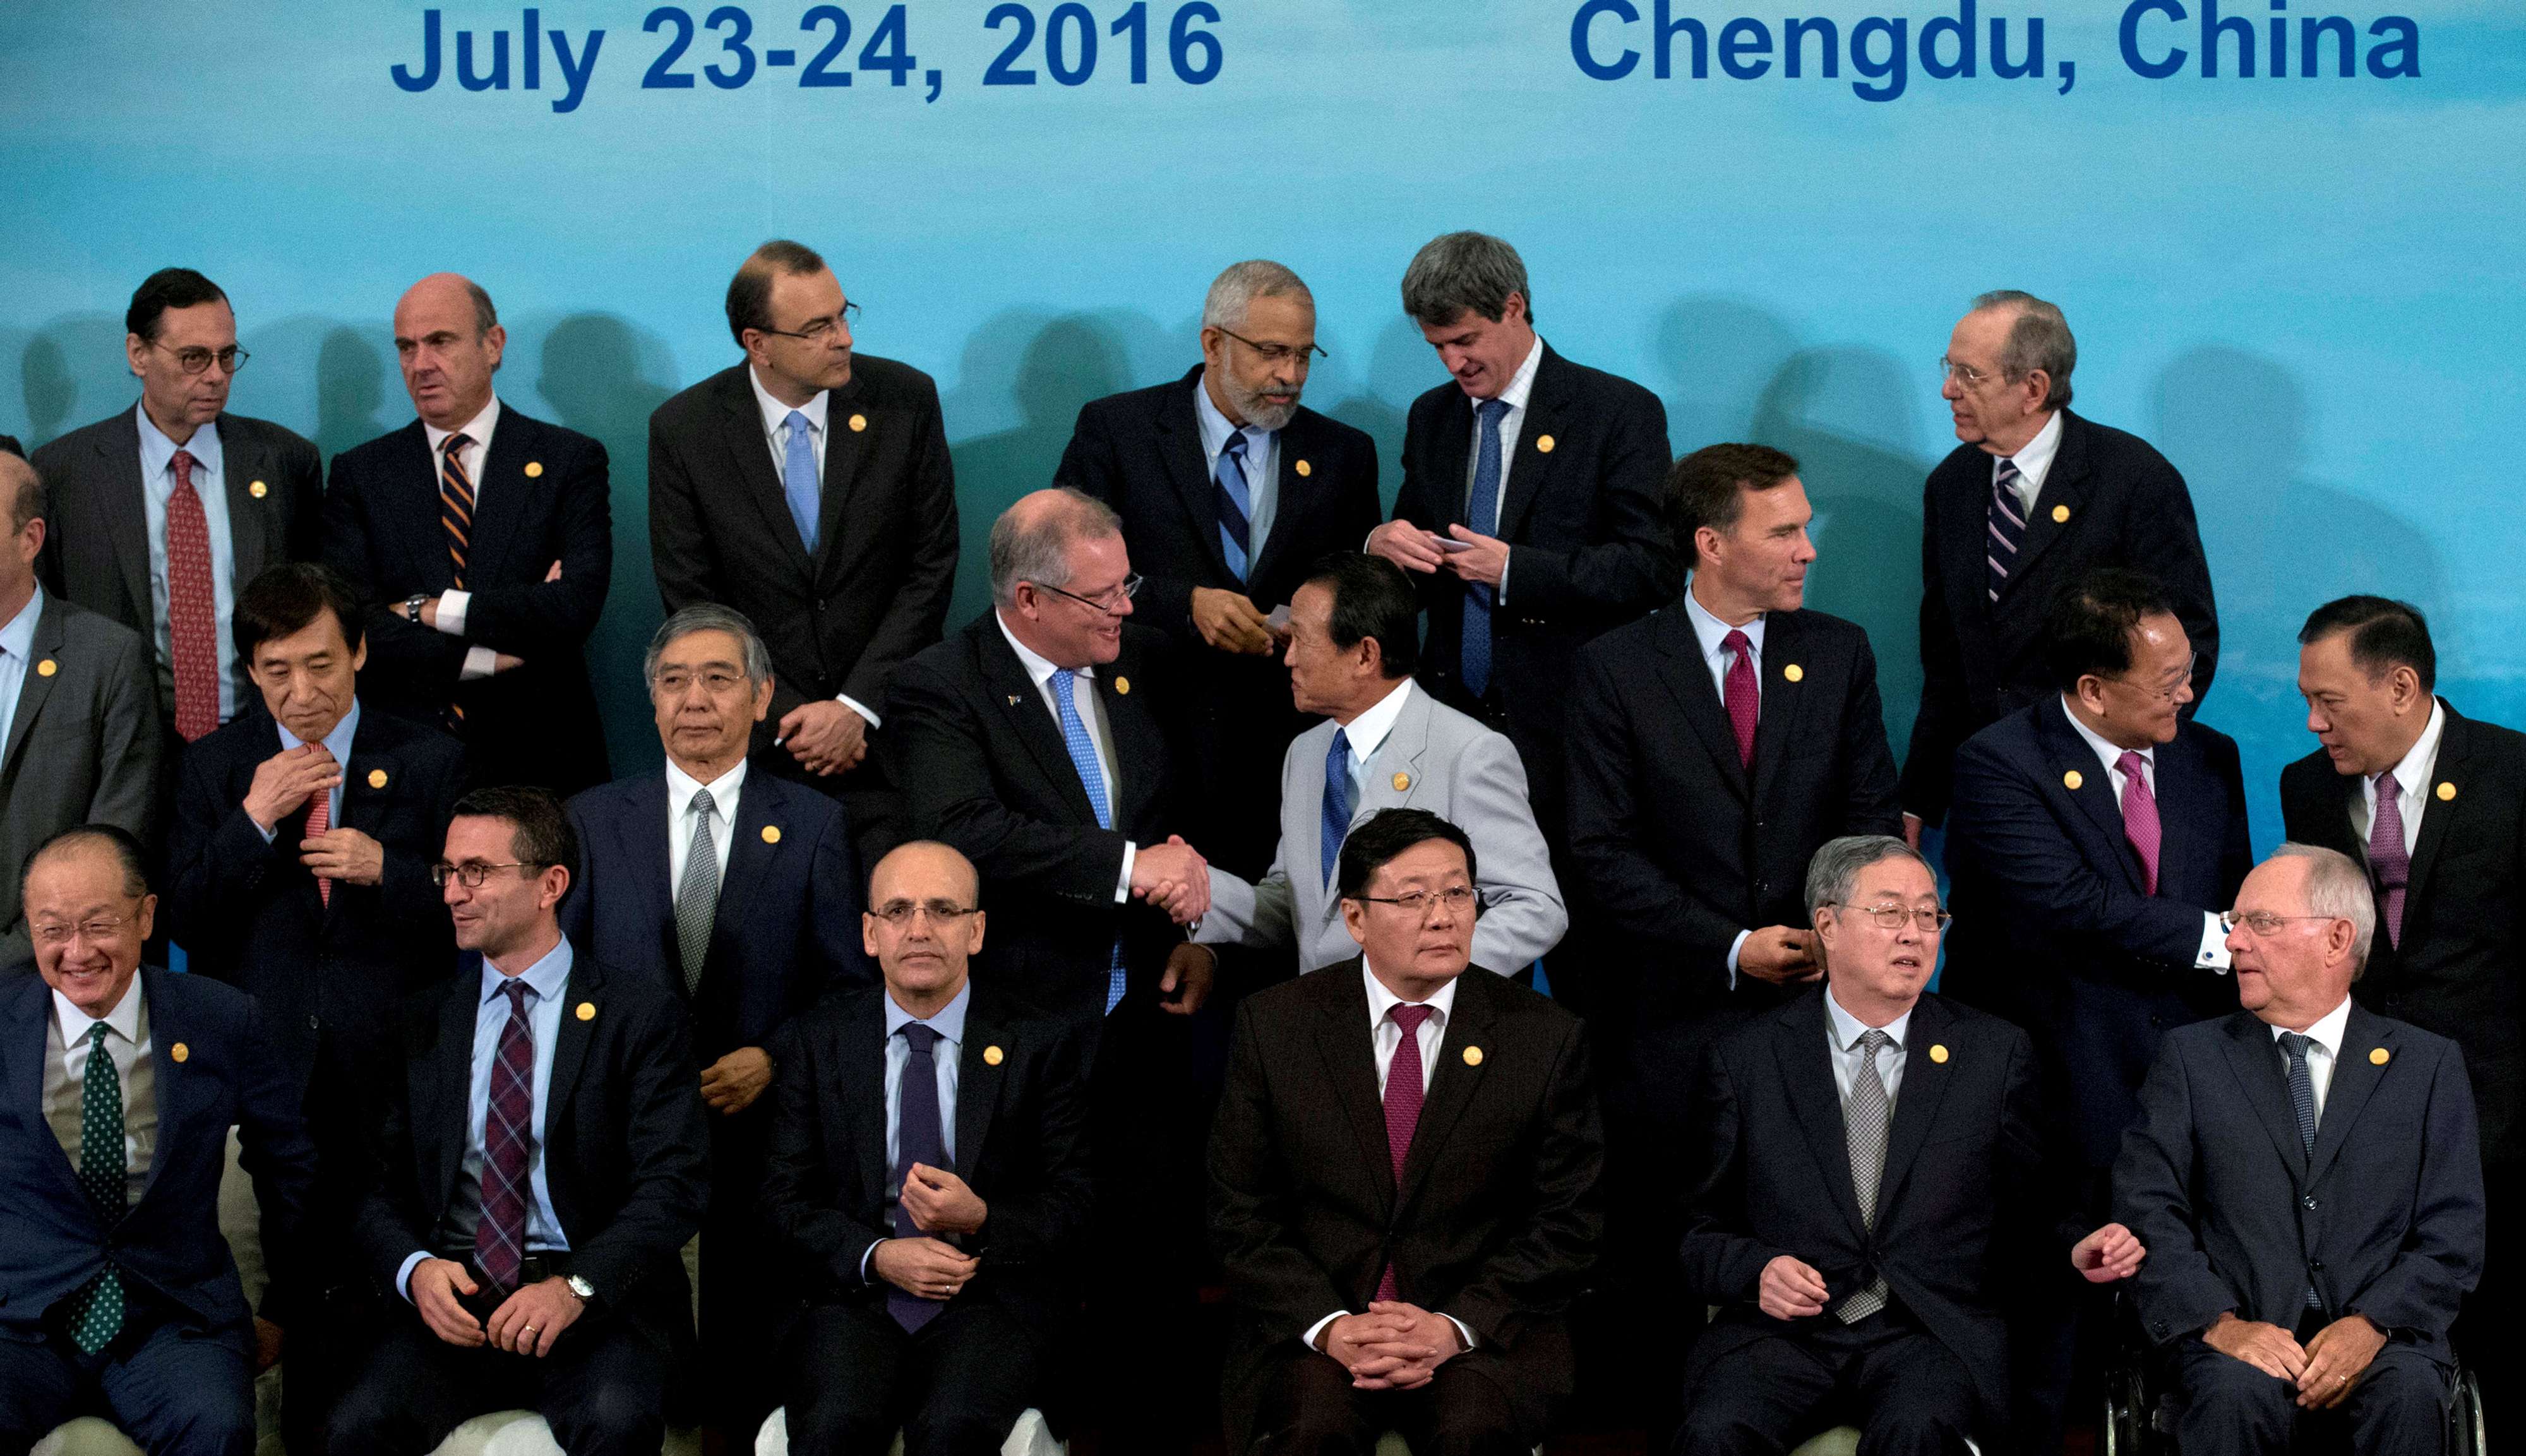 G20 finance ministers and central bank governors gather for a group photo on July 24 during two days of talks in Chengdu, Sichuan, ahead of the G20 leaders’ summit in Hangzhou. Photo: Reuters